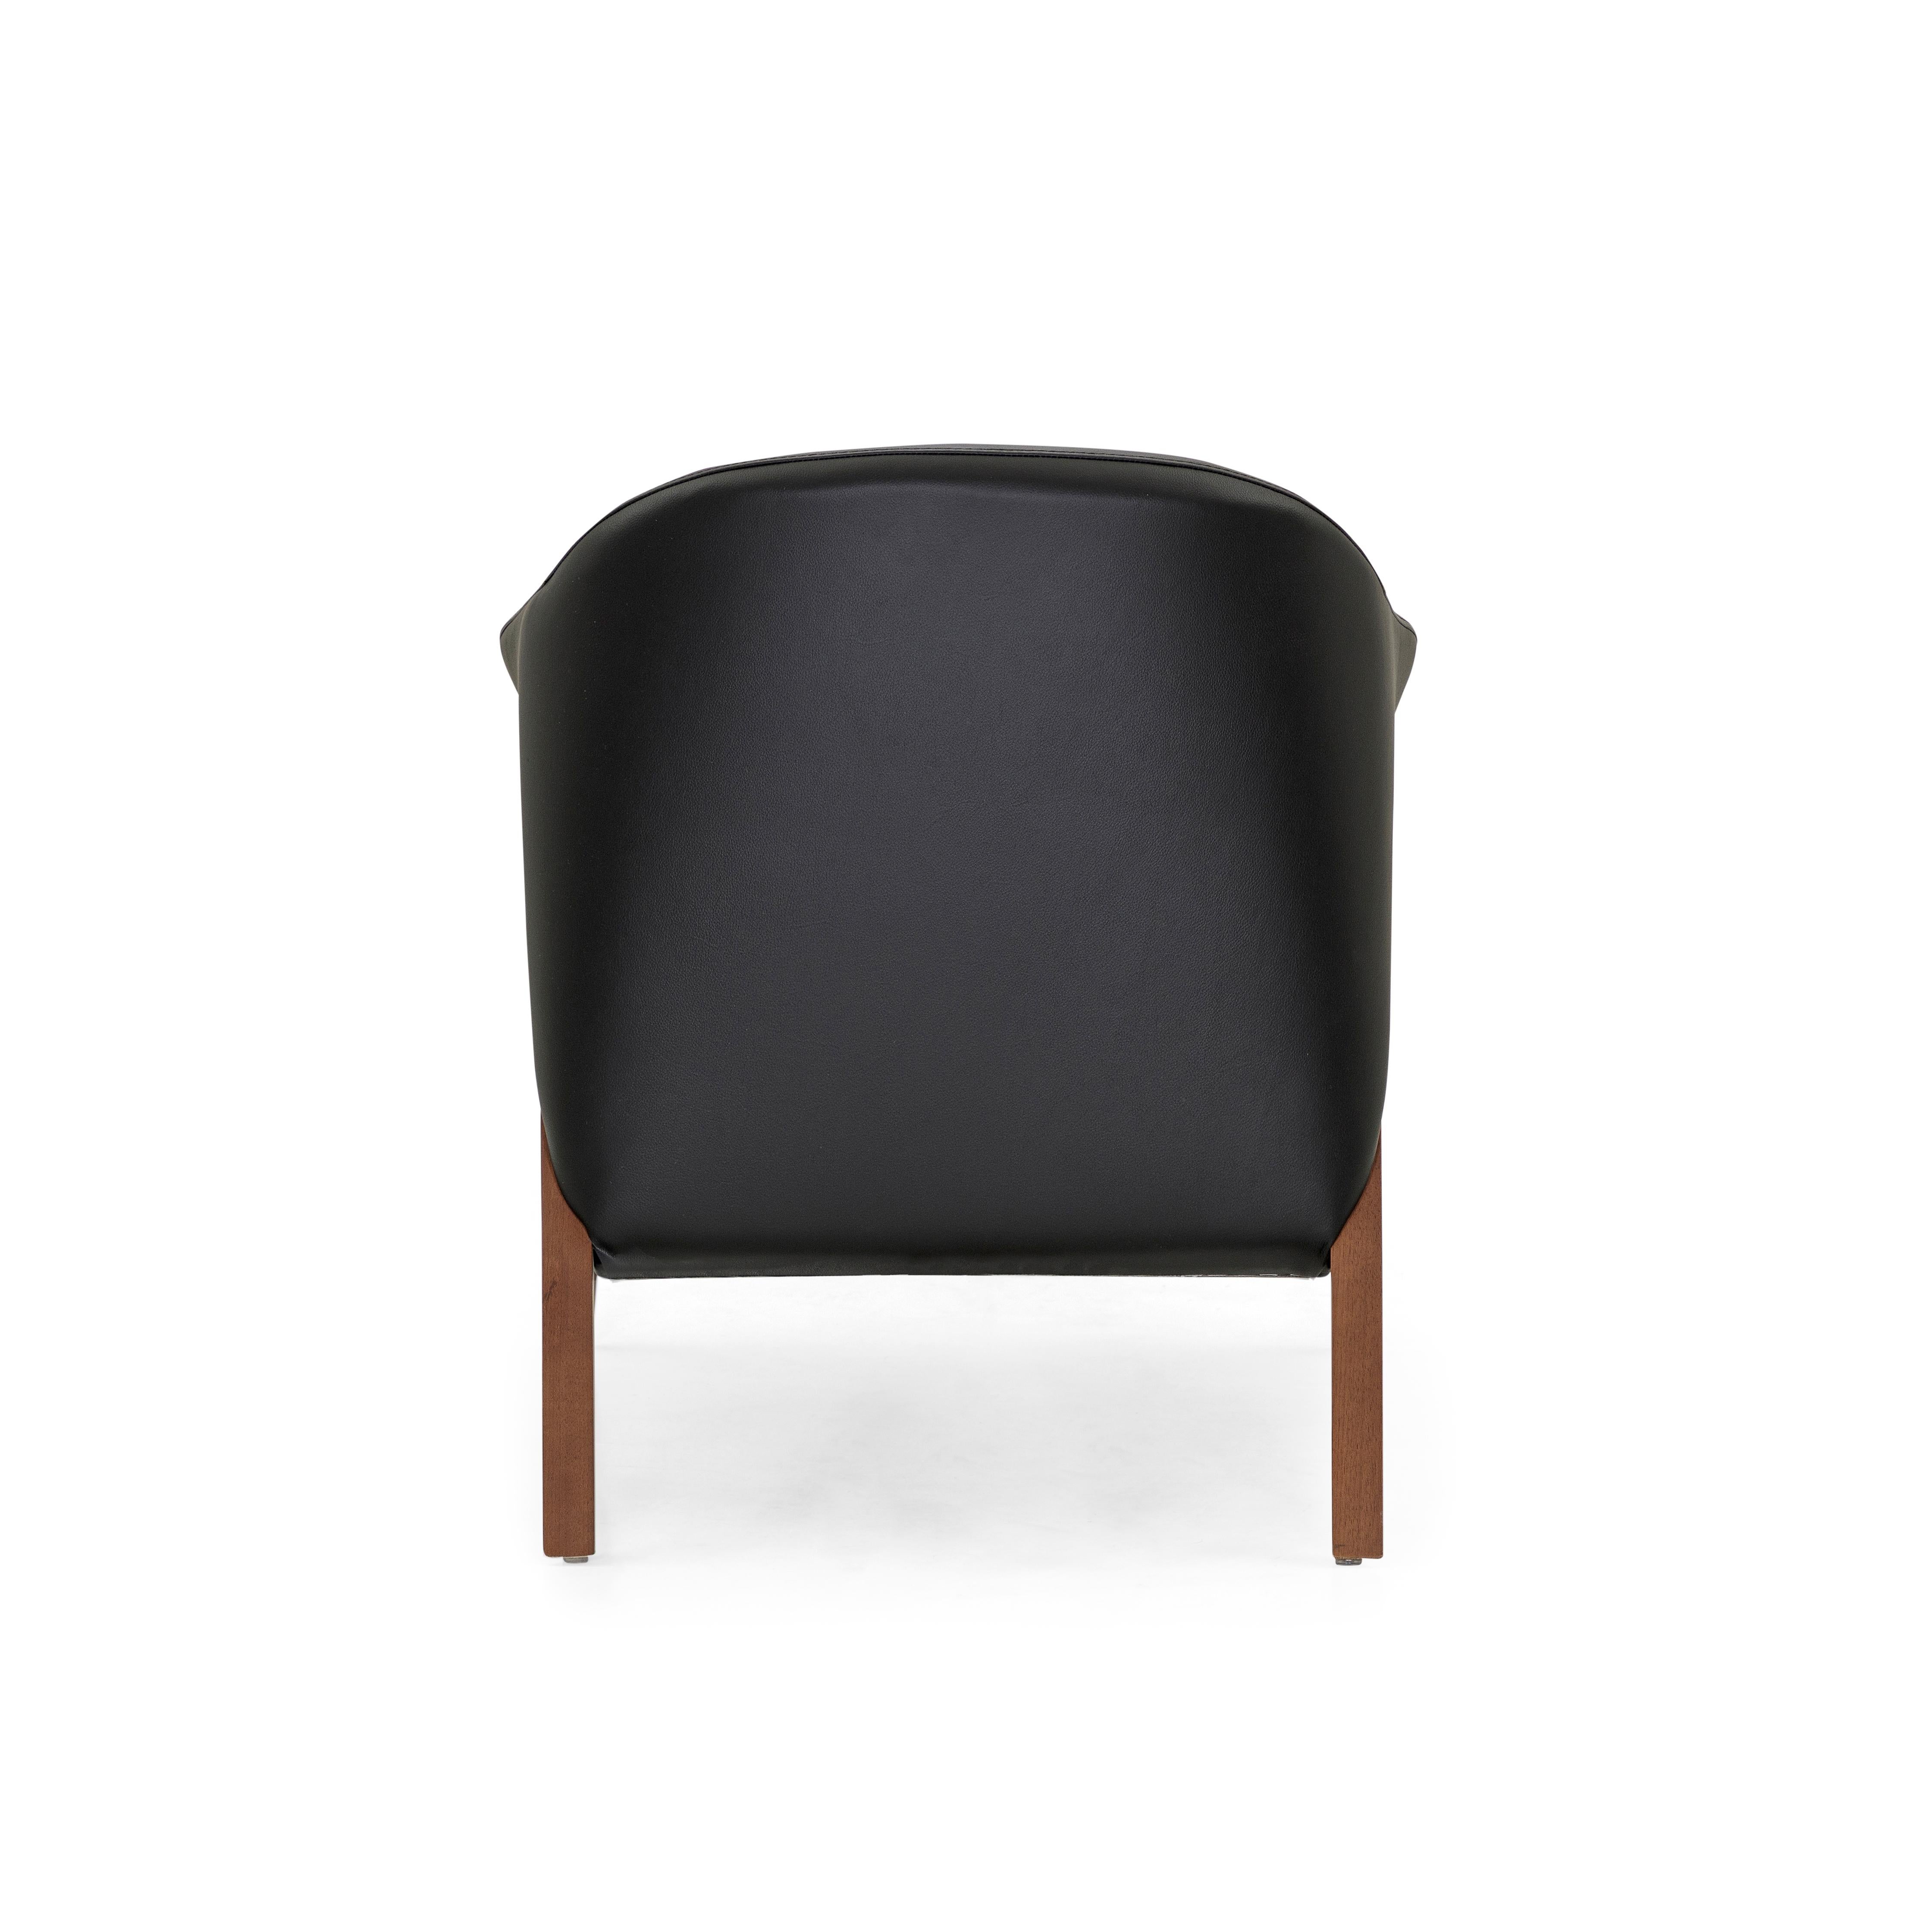 Osa Upholstered Curve Back Armchair in Walnut Wood Finish and Black Leather In New Condition For Sale In Miami, FL